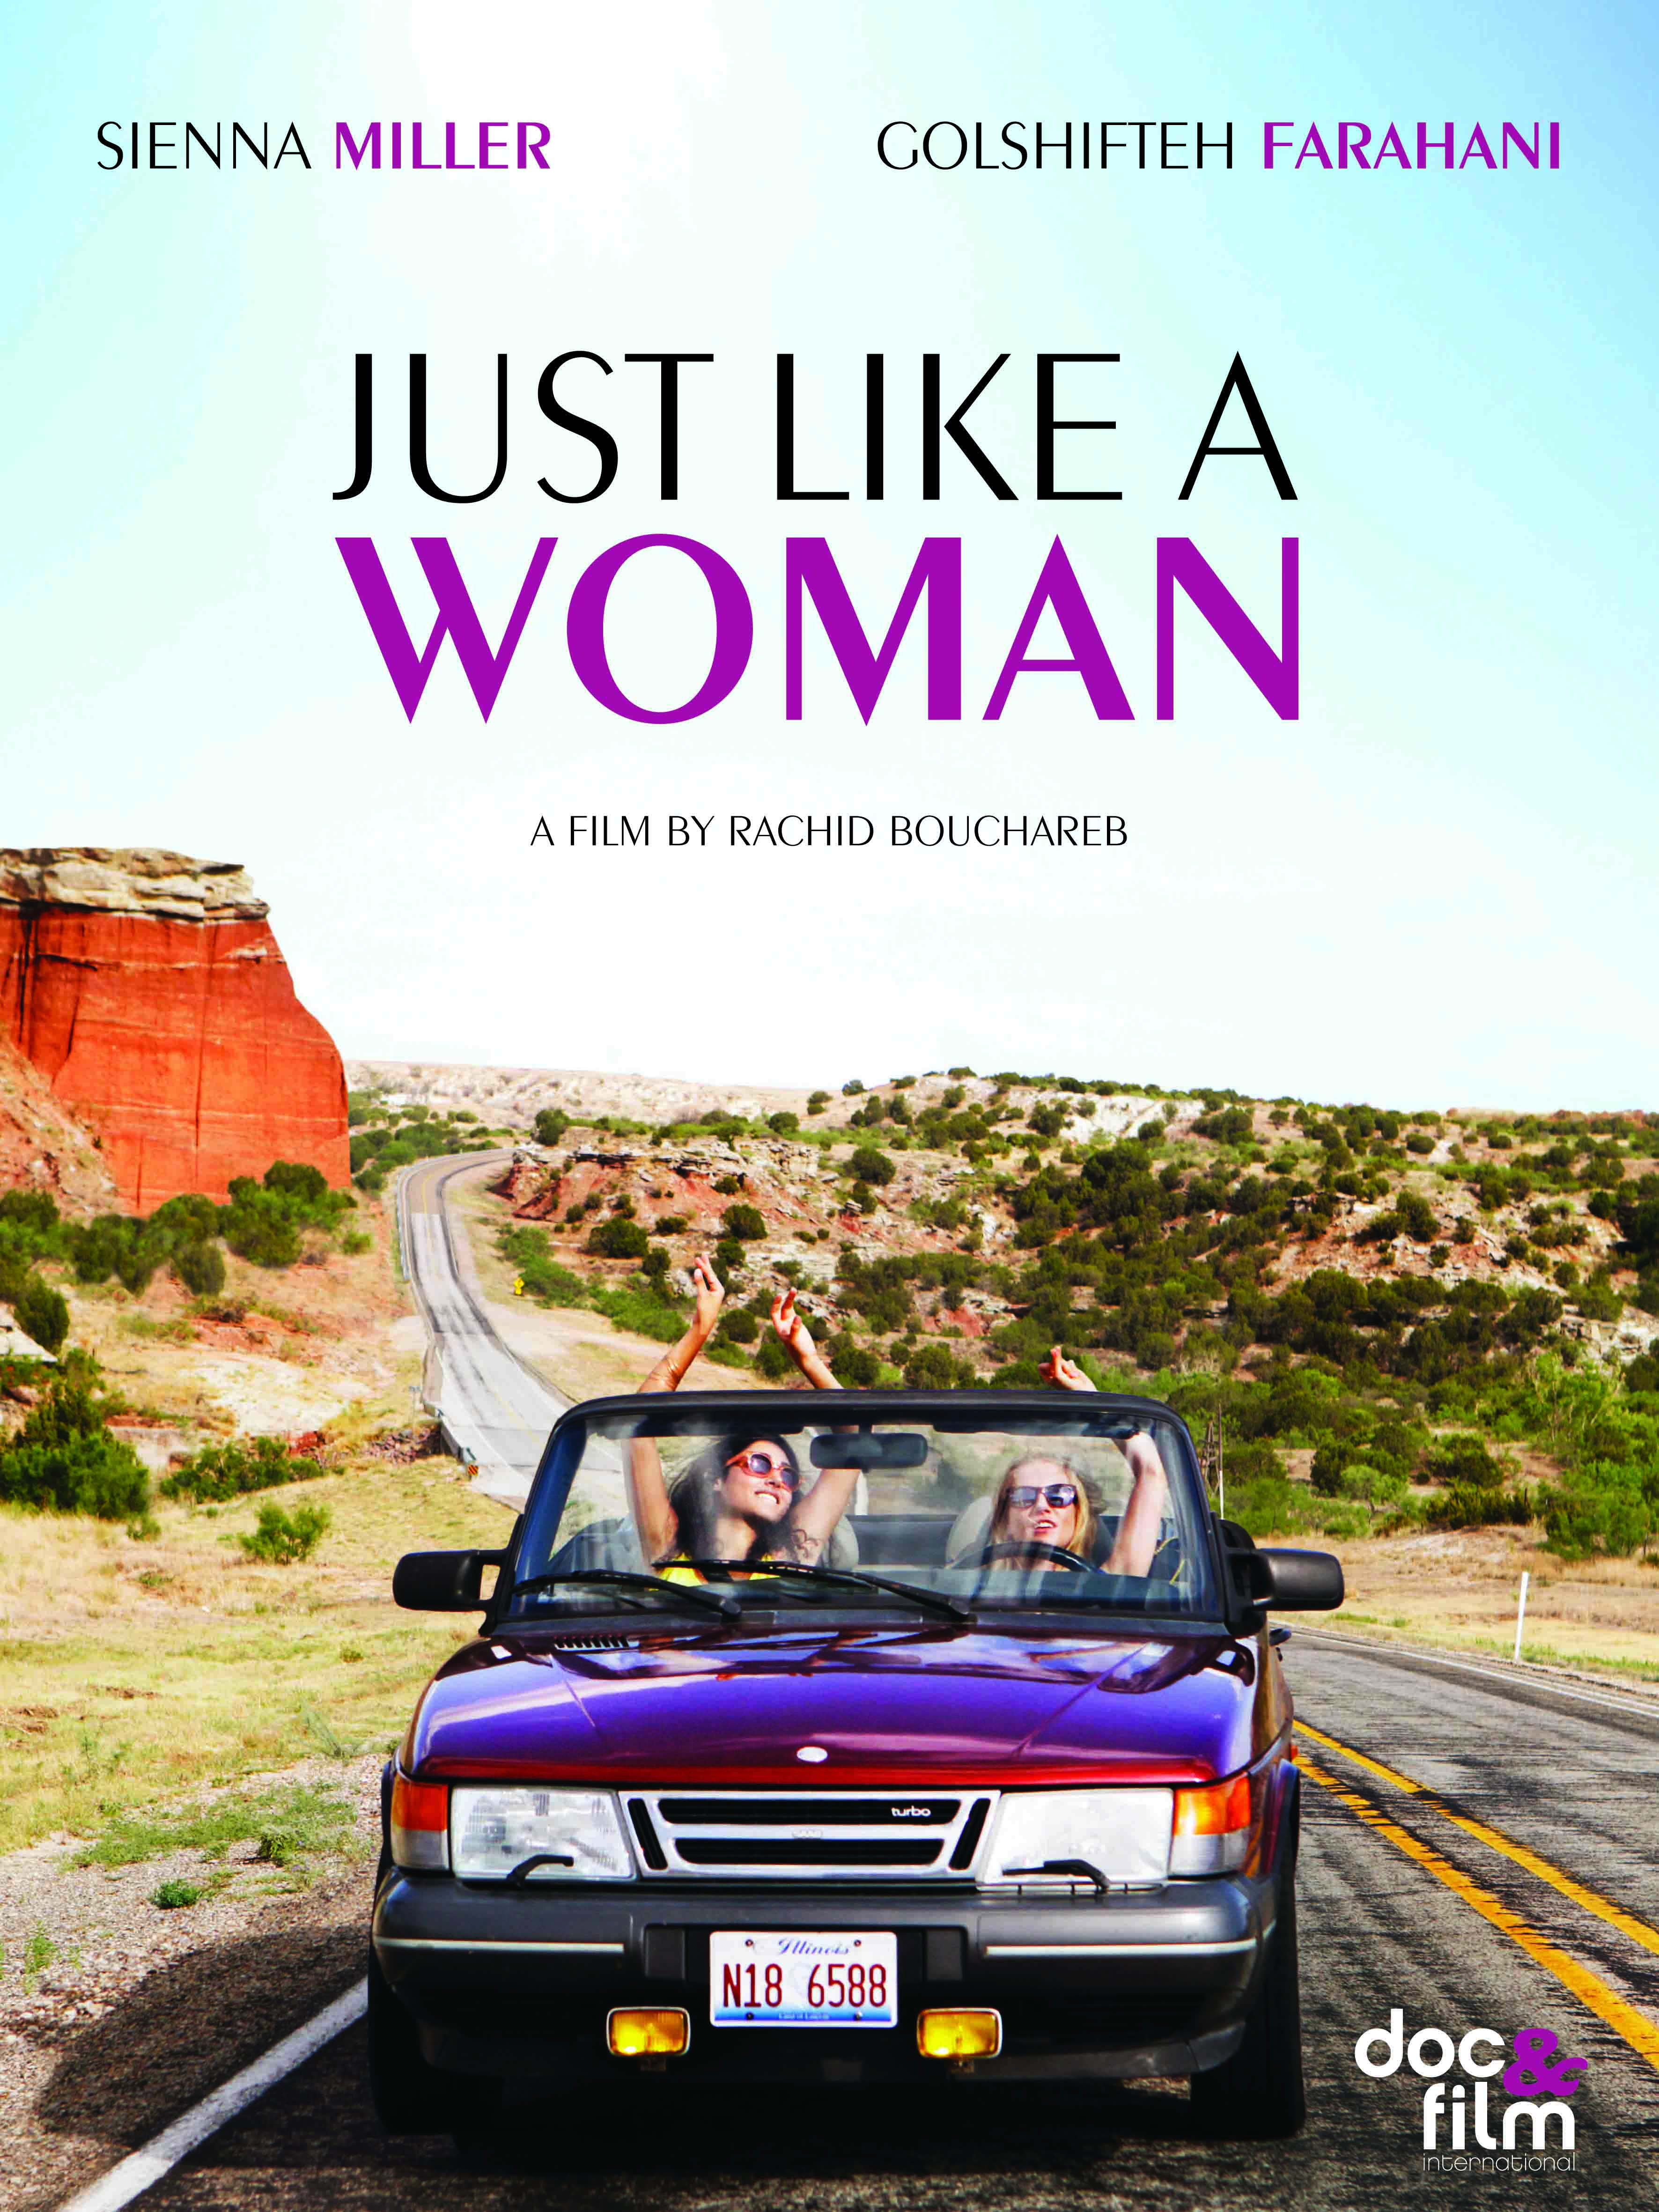 Just like a Woman - a film by Rachid Bouchareb